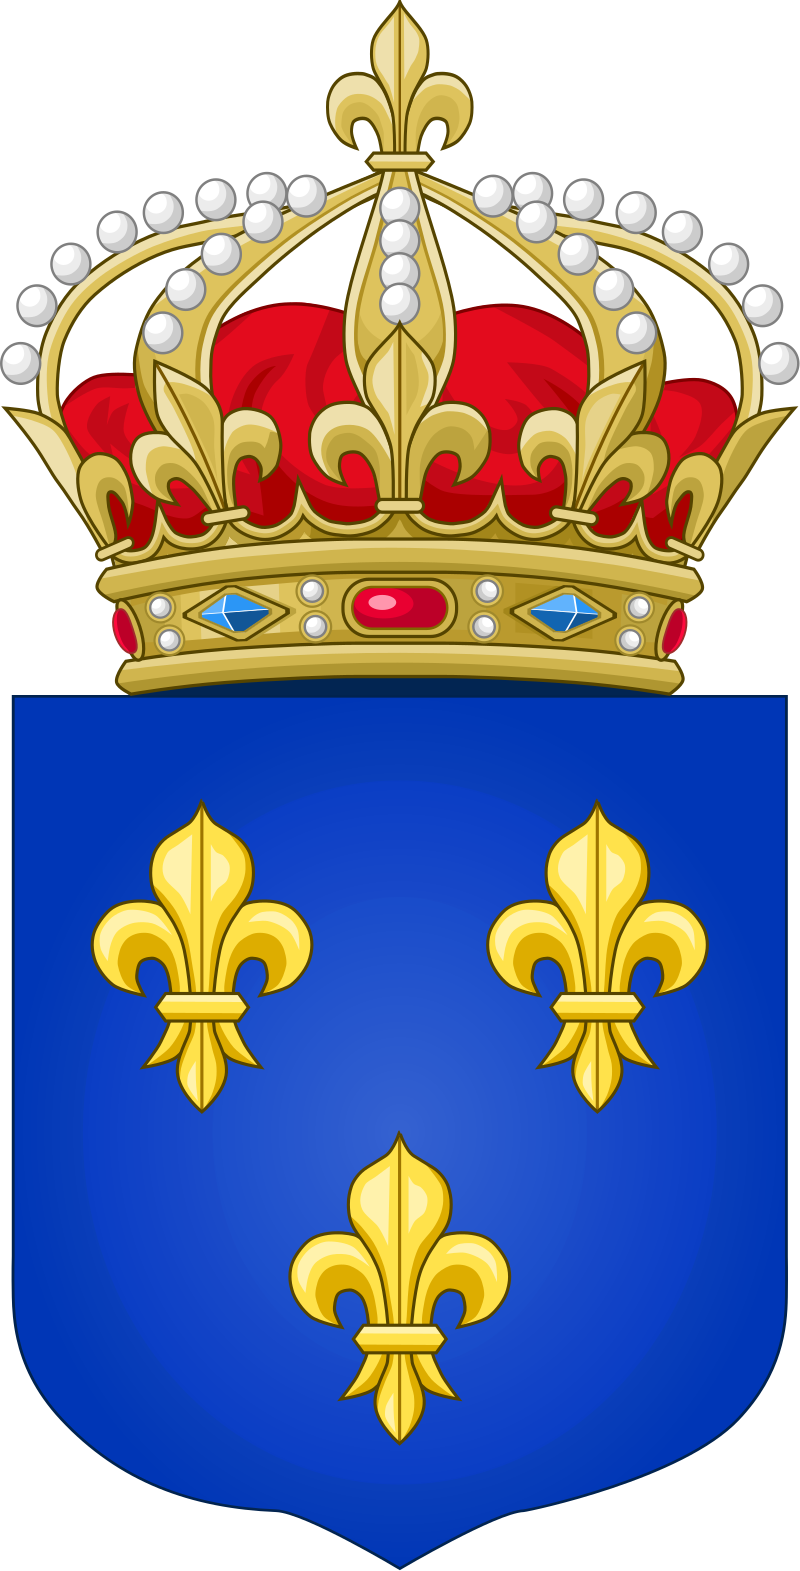 800px-Arms_of_the_Kingdom_of_France.svg.png